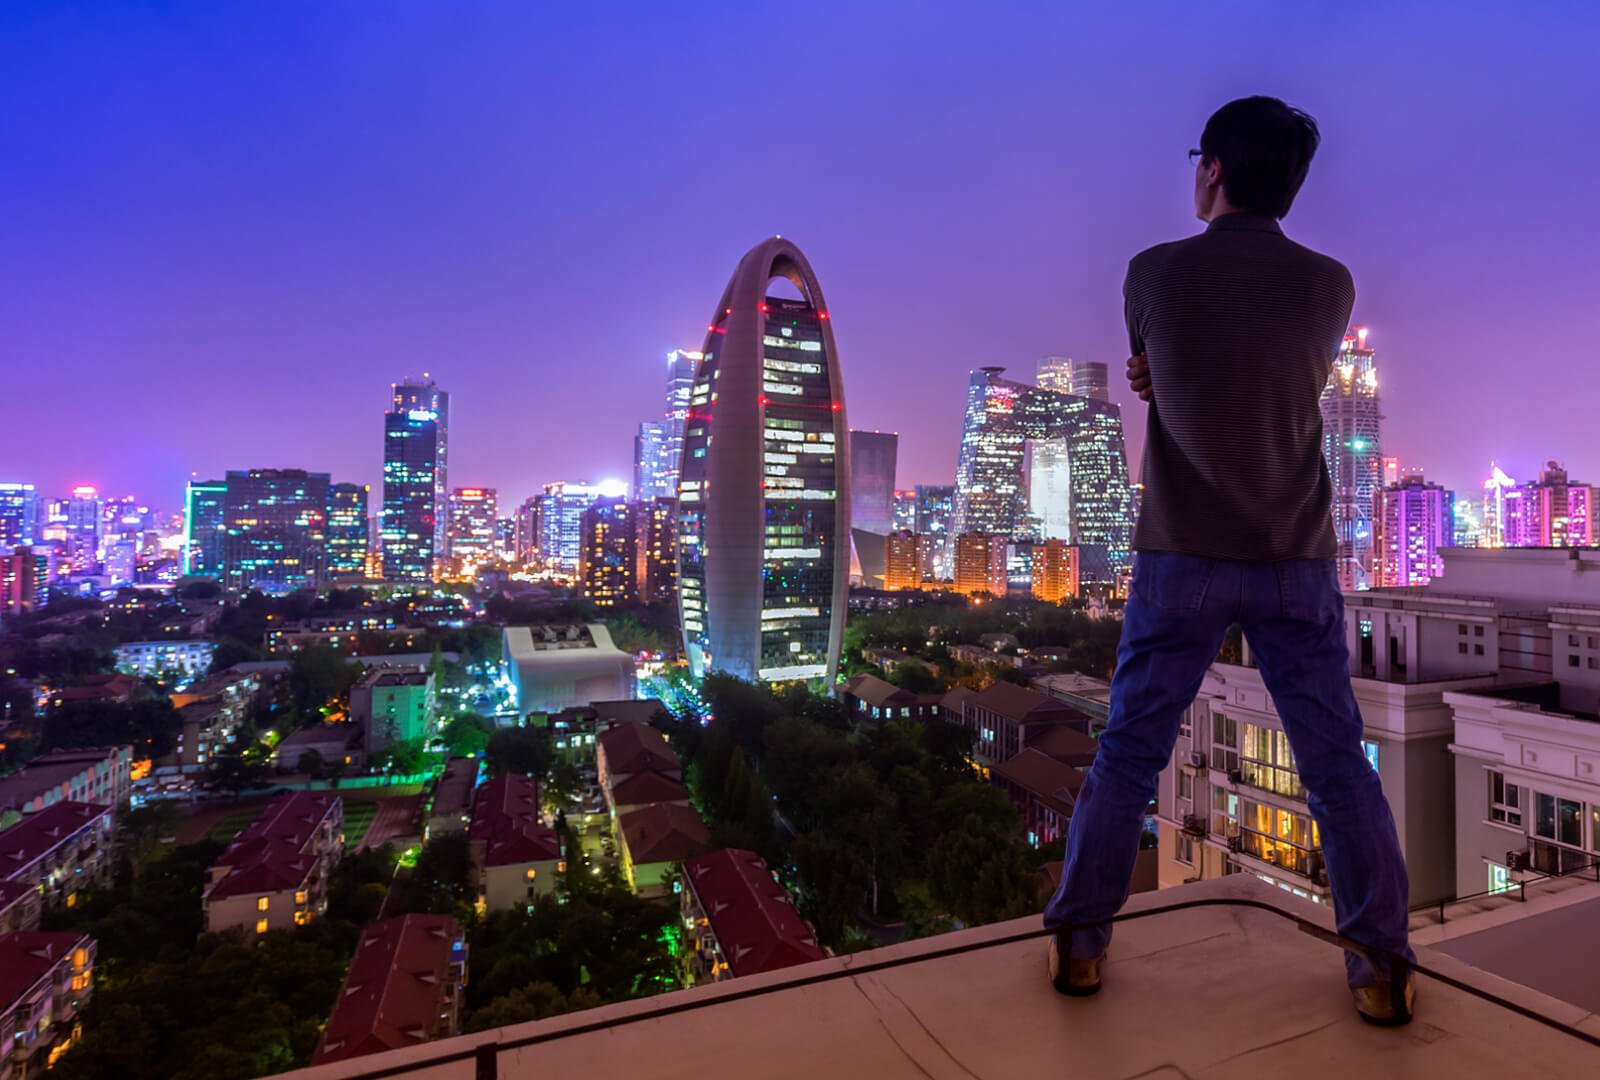 Man standing on a rooftop overlooking a cityscape at night.